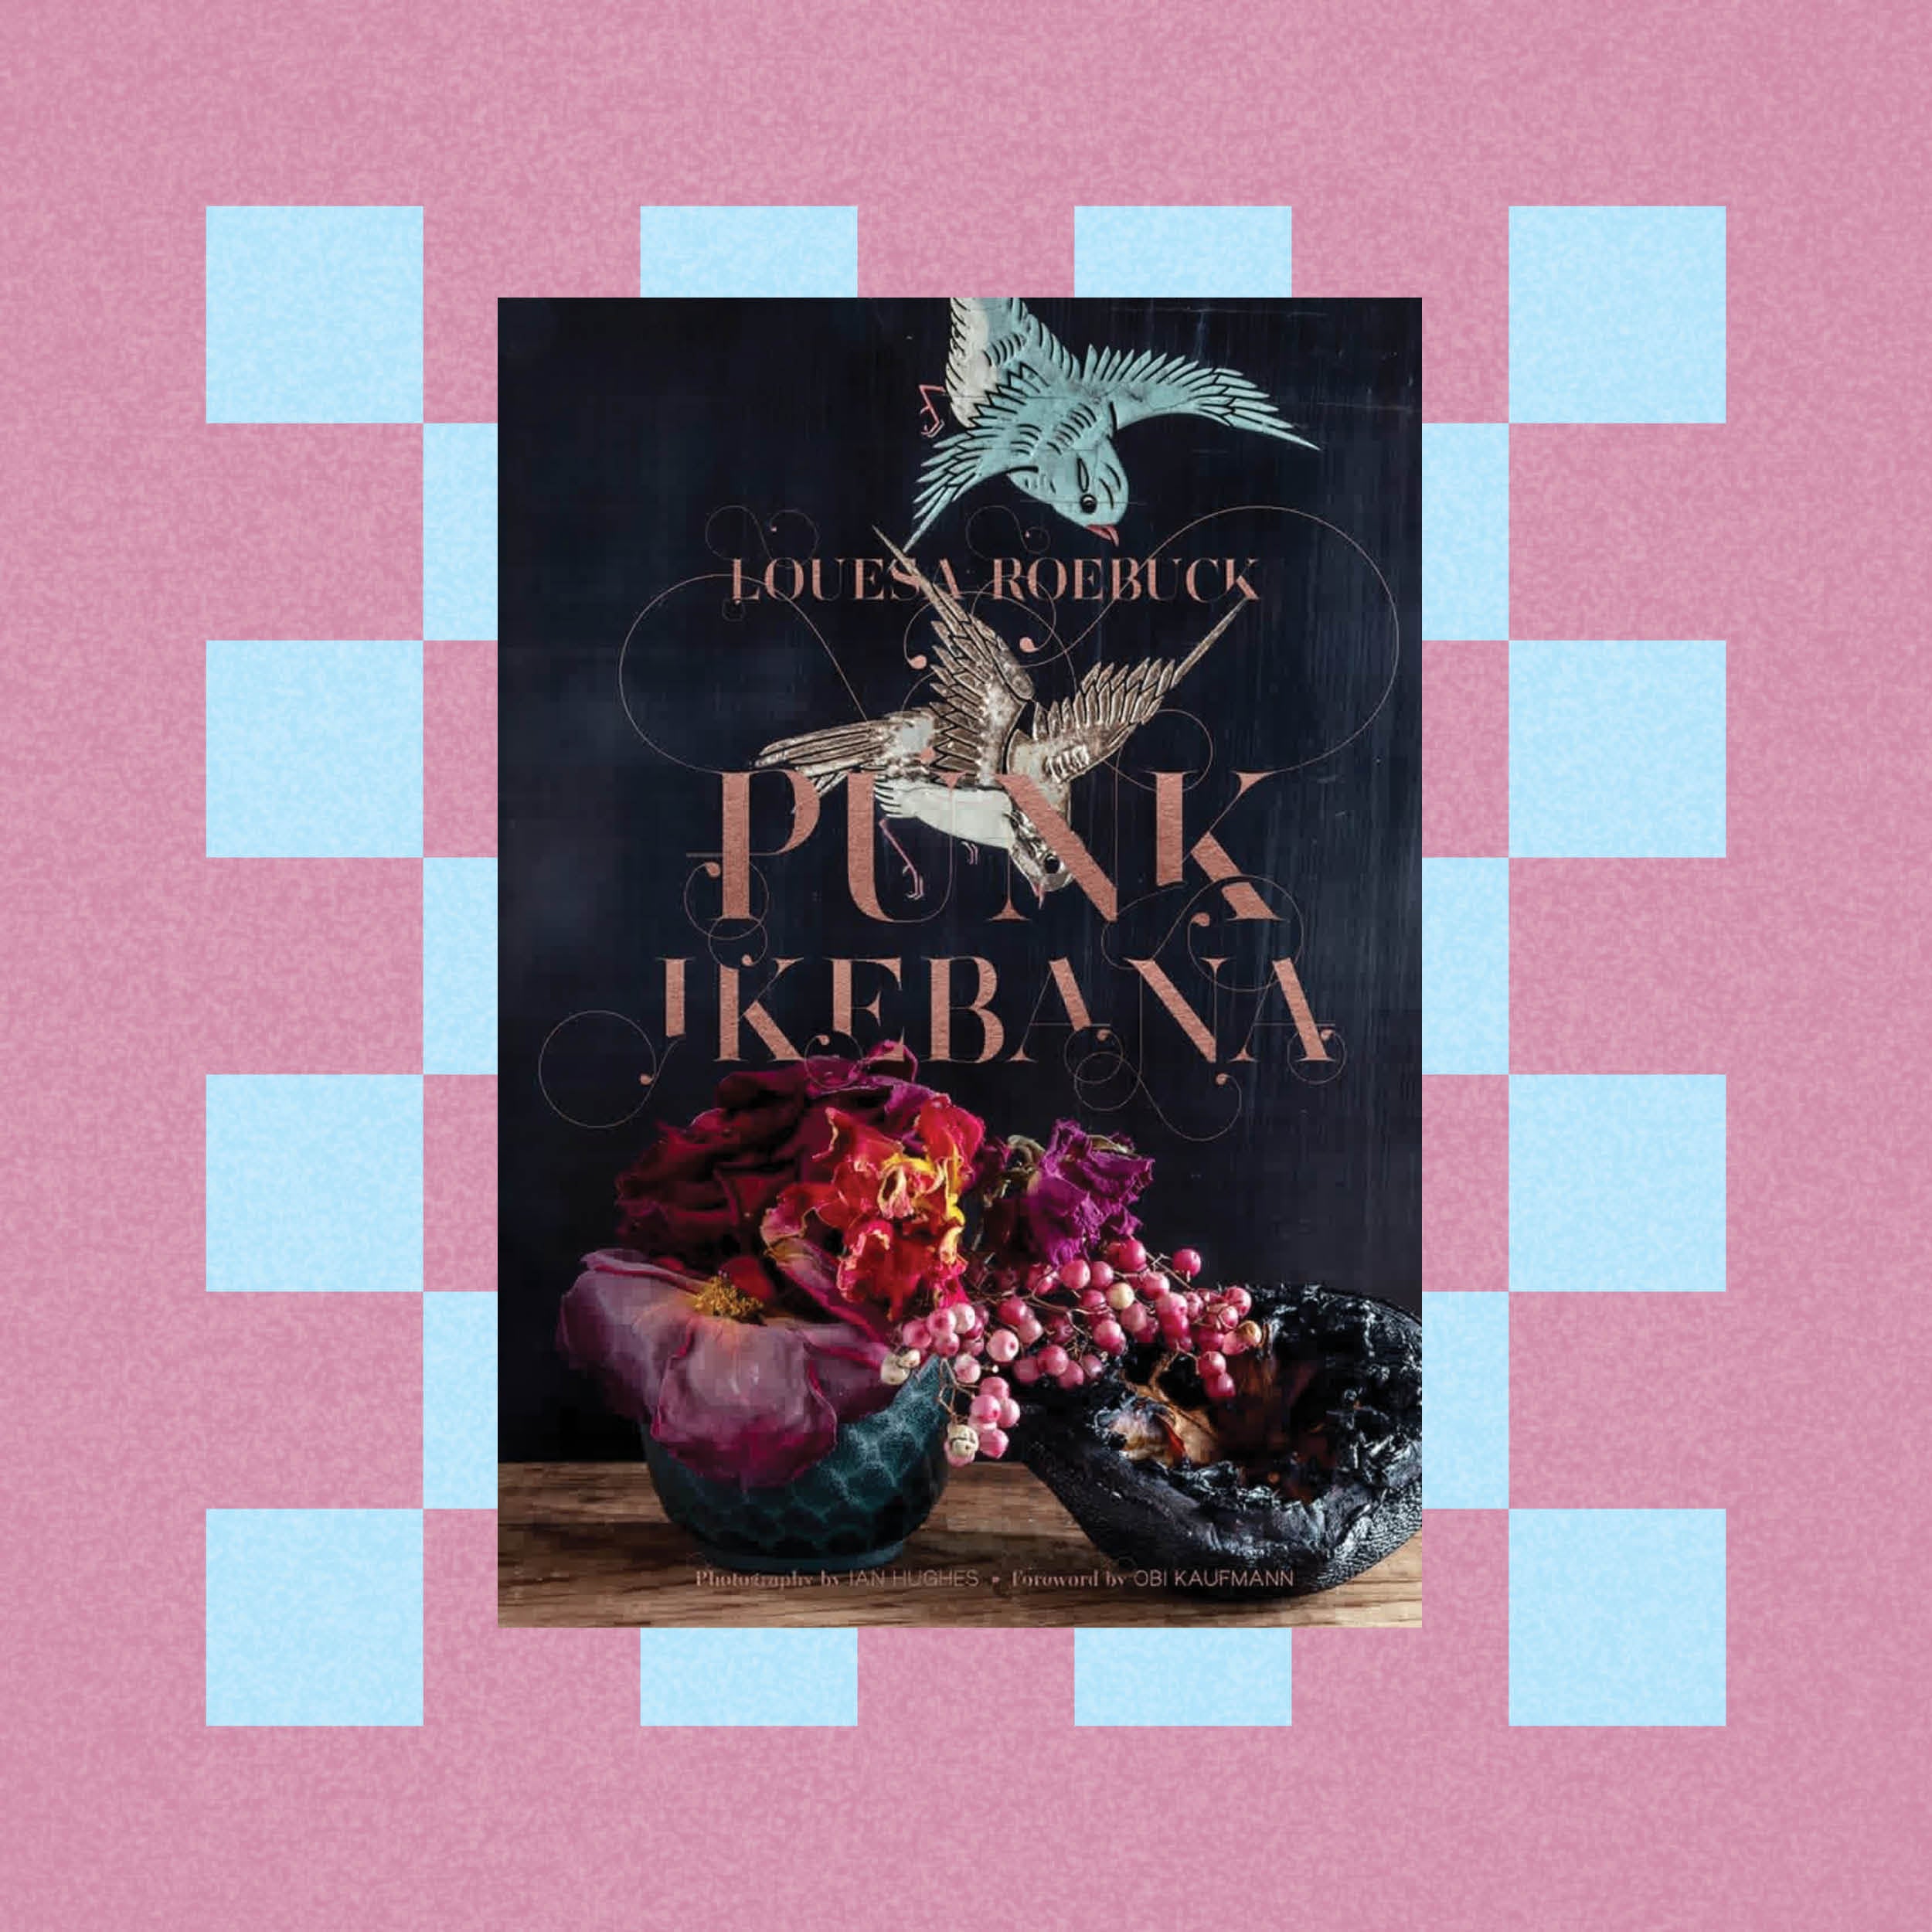 Book cover of Punk Ikebana on checker grid background